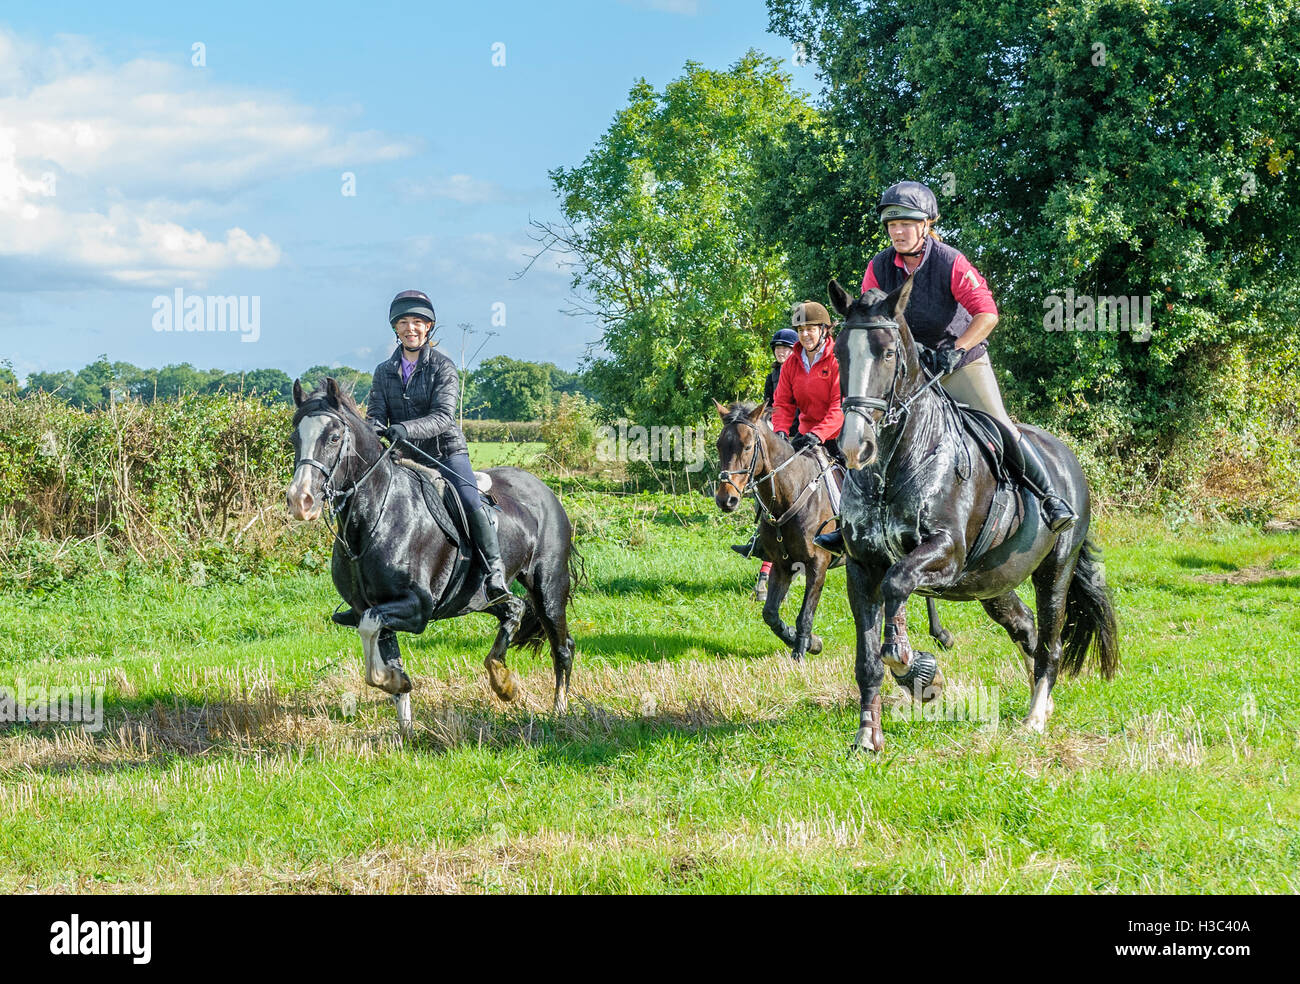 Riders on a horses galloping at speed along a field in autumn sunshine Stock Photo